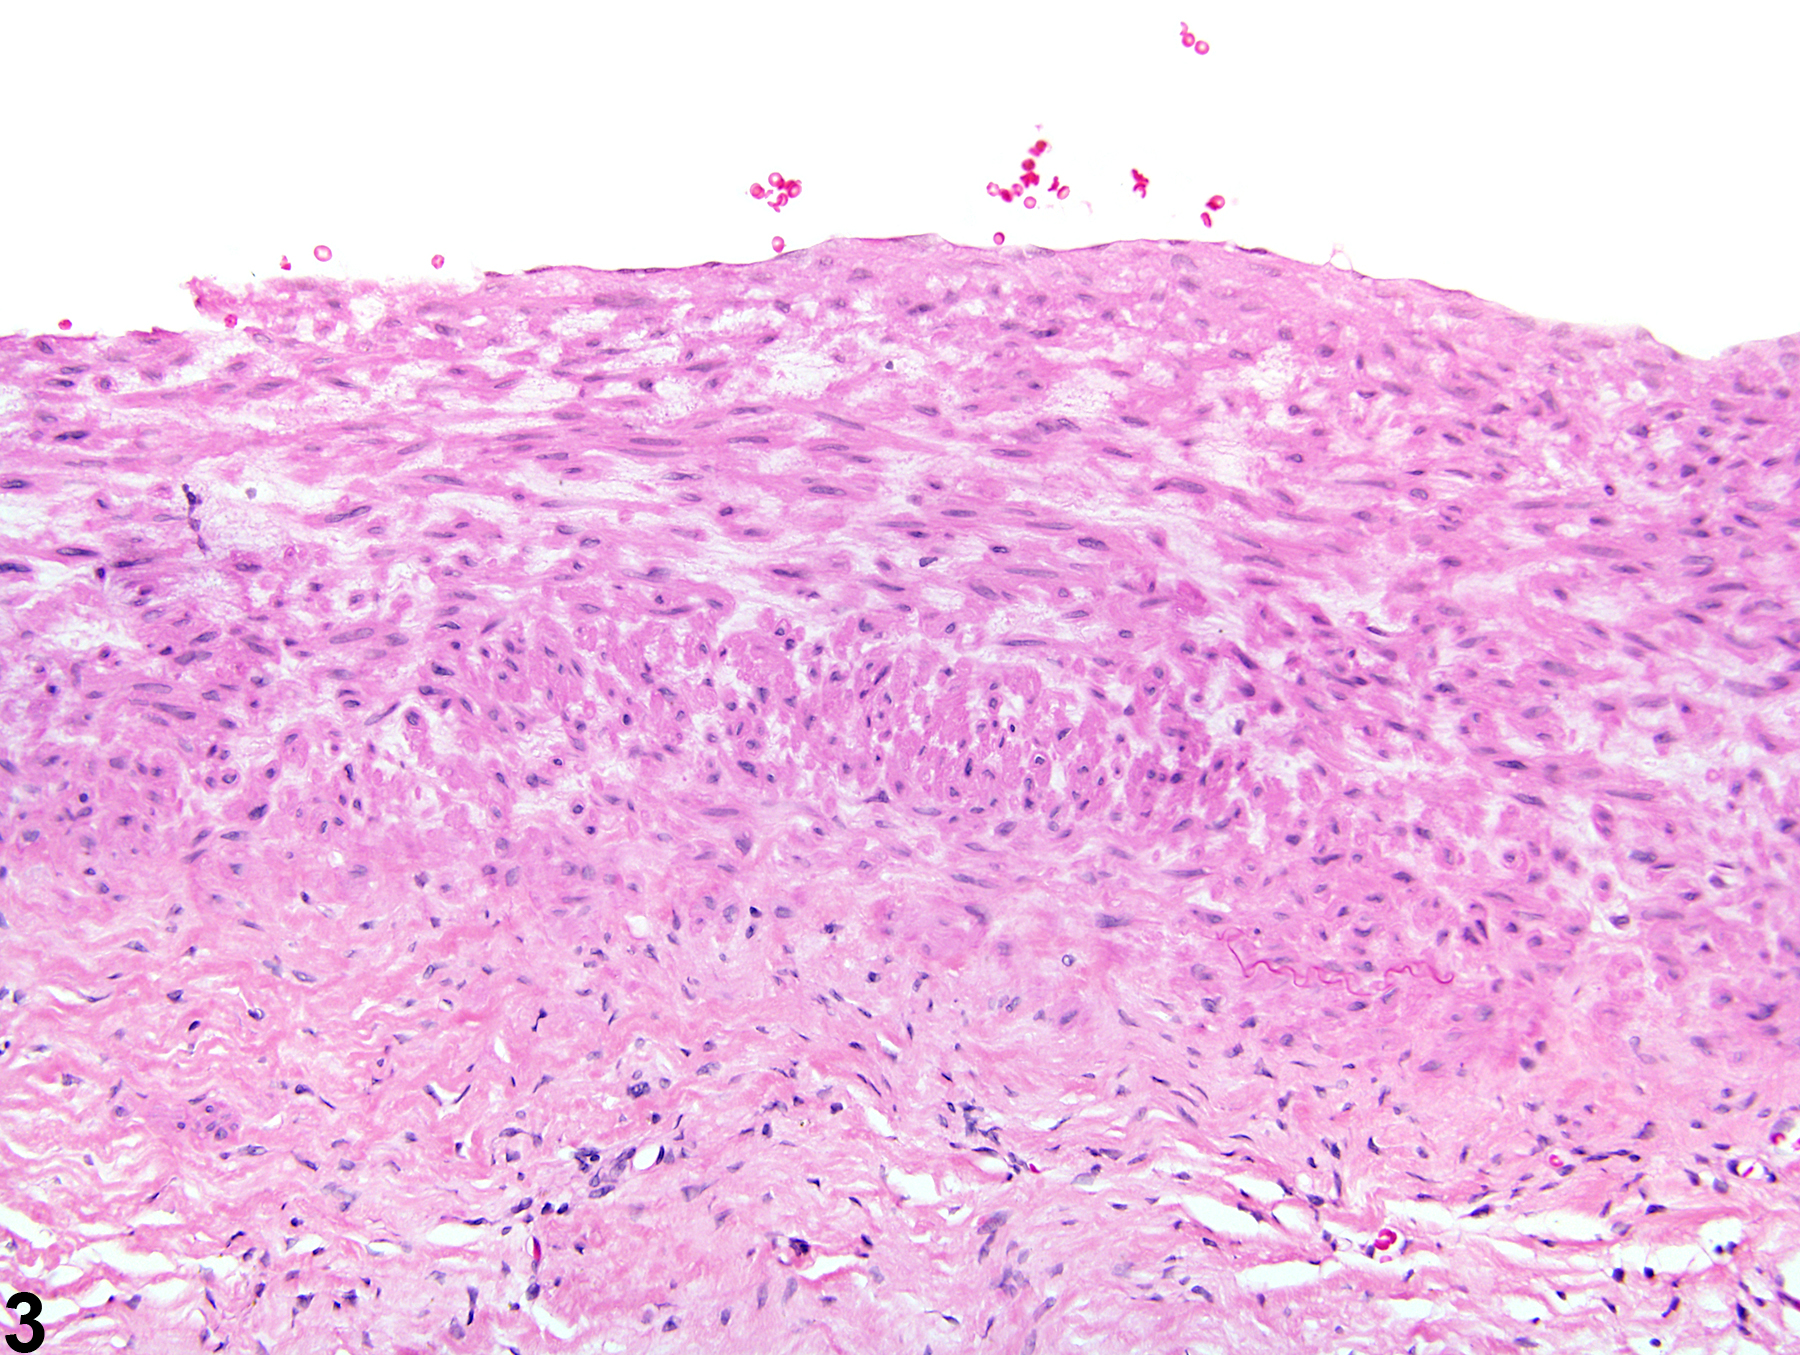 Image of arteriosclerosis in the mesentery, artery from a male F344/N rat in a chronic study